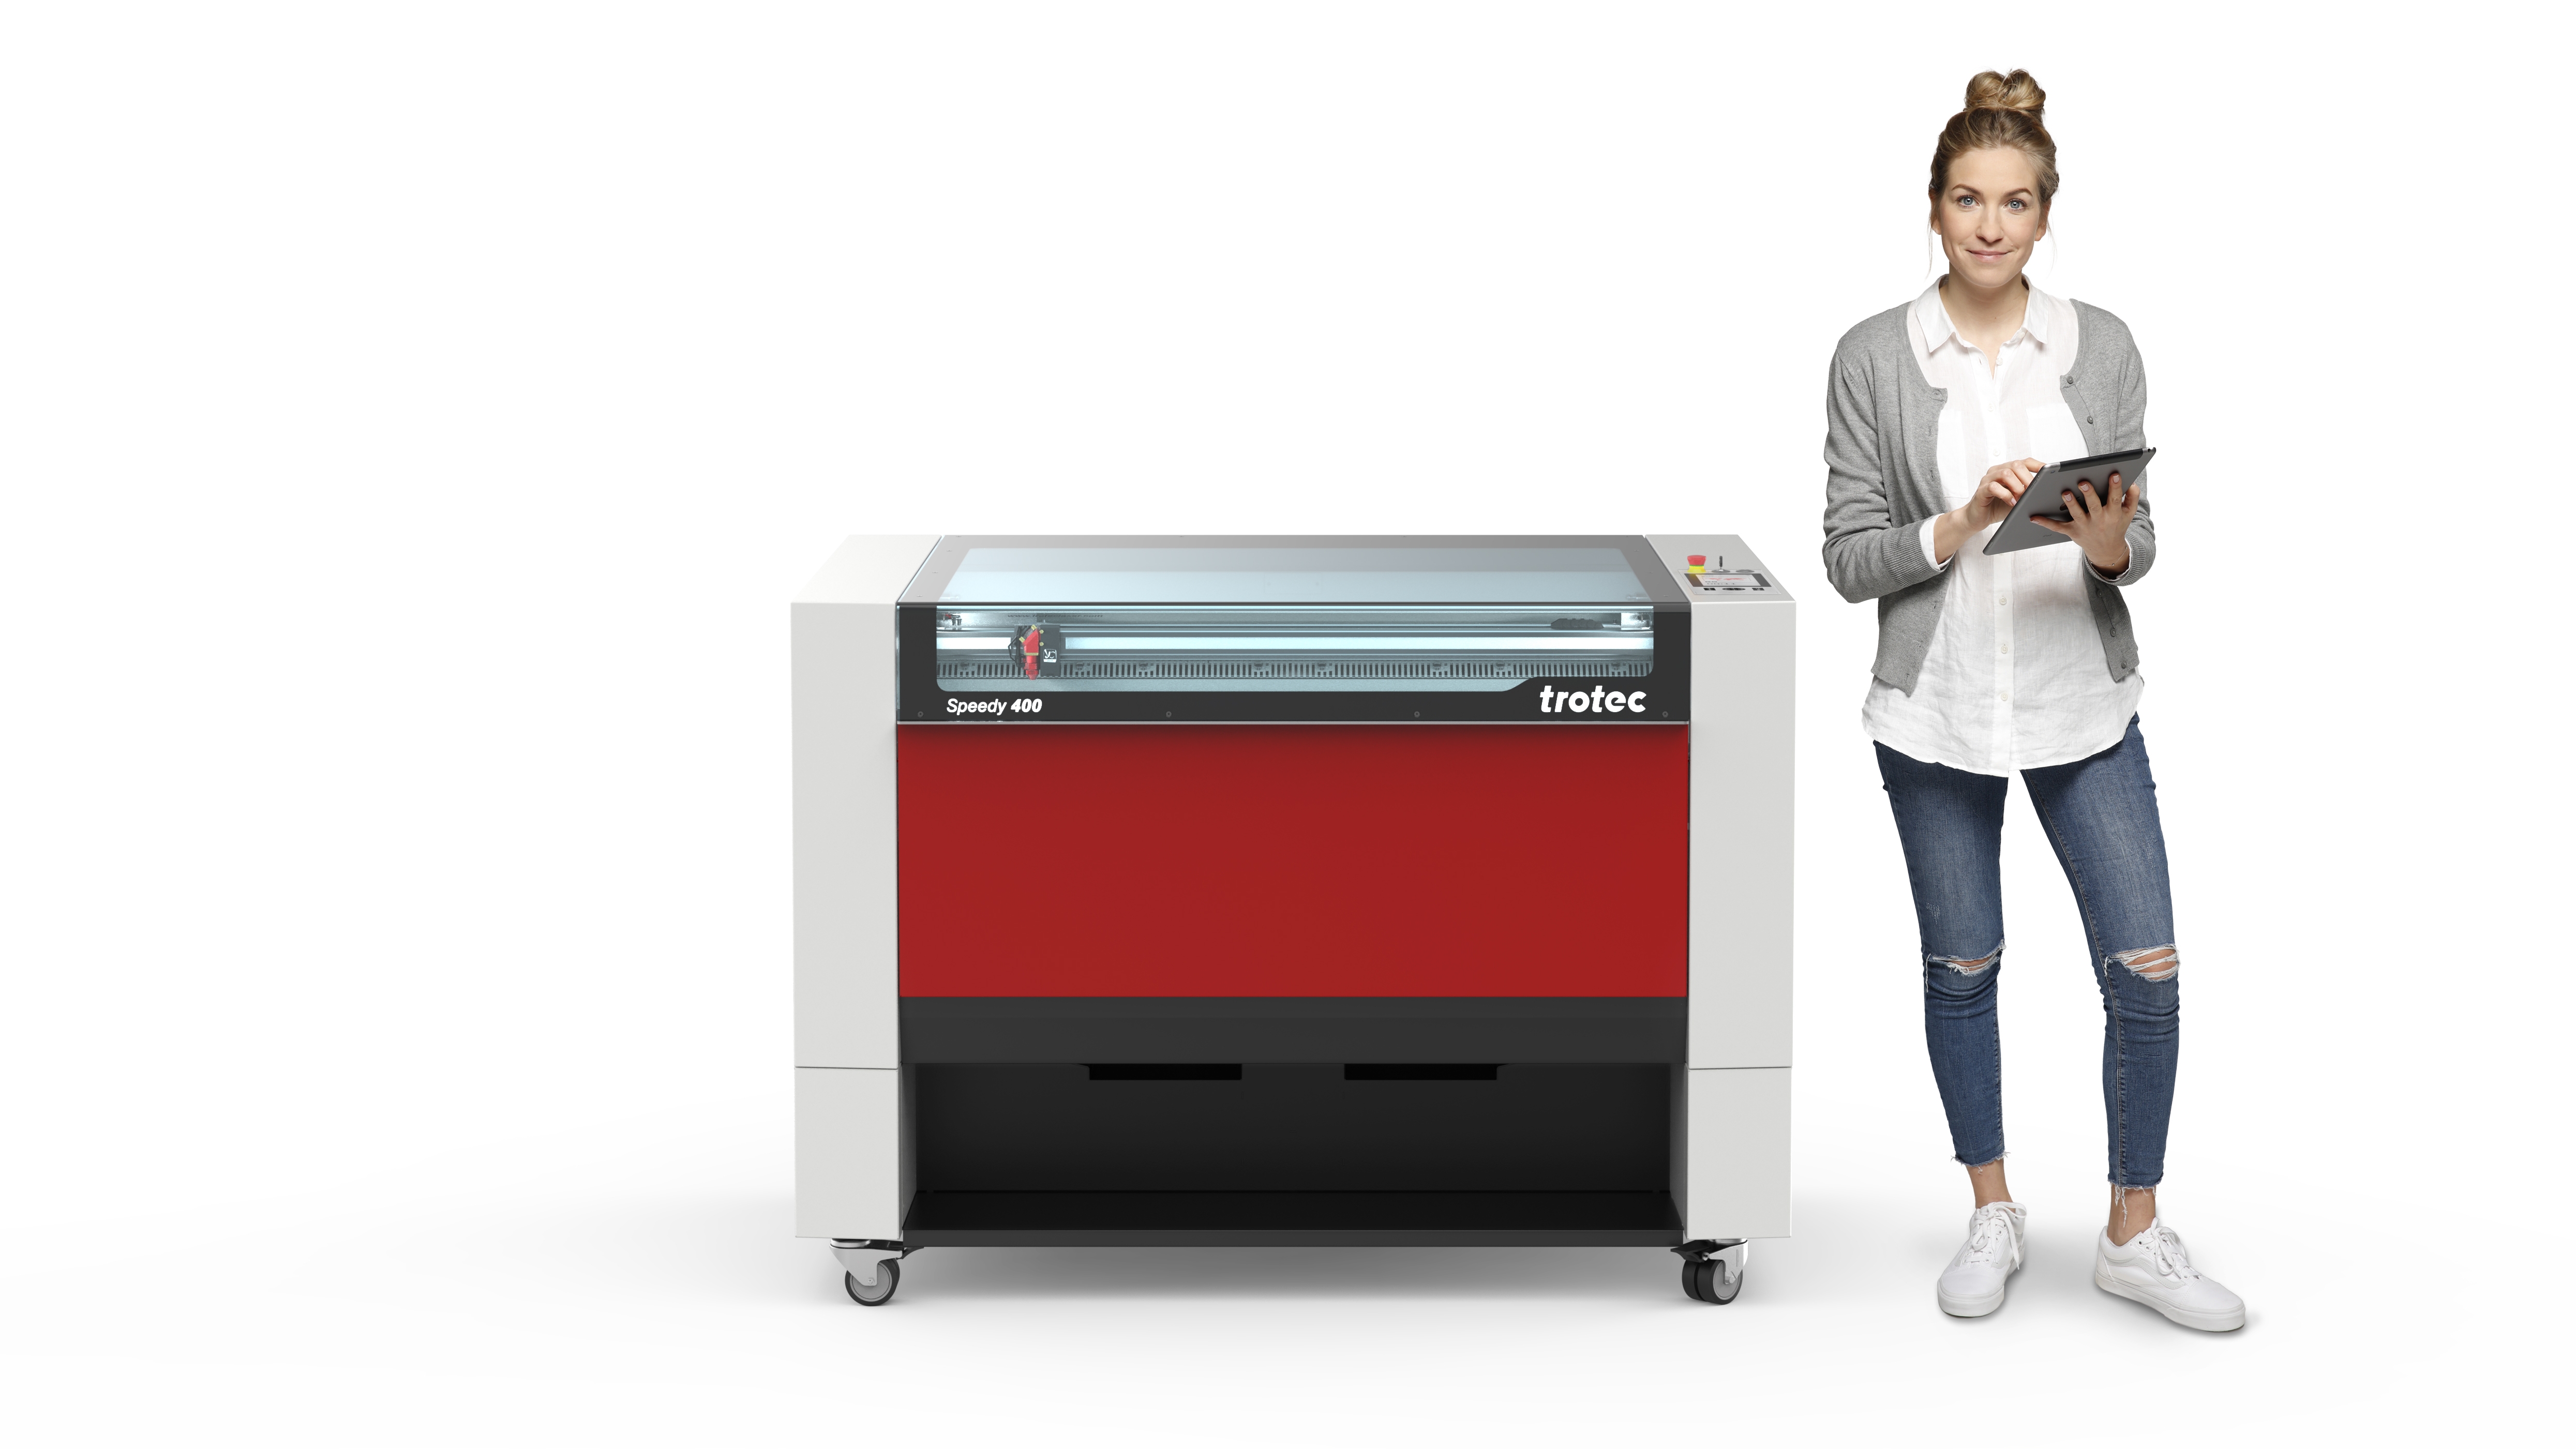 <p>The new TRO Speedy 400 laser engraver by Trotec</p>
